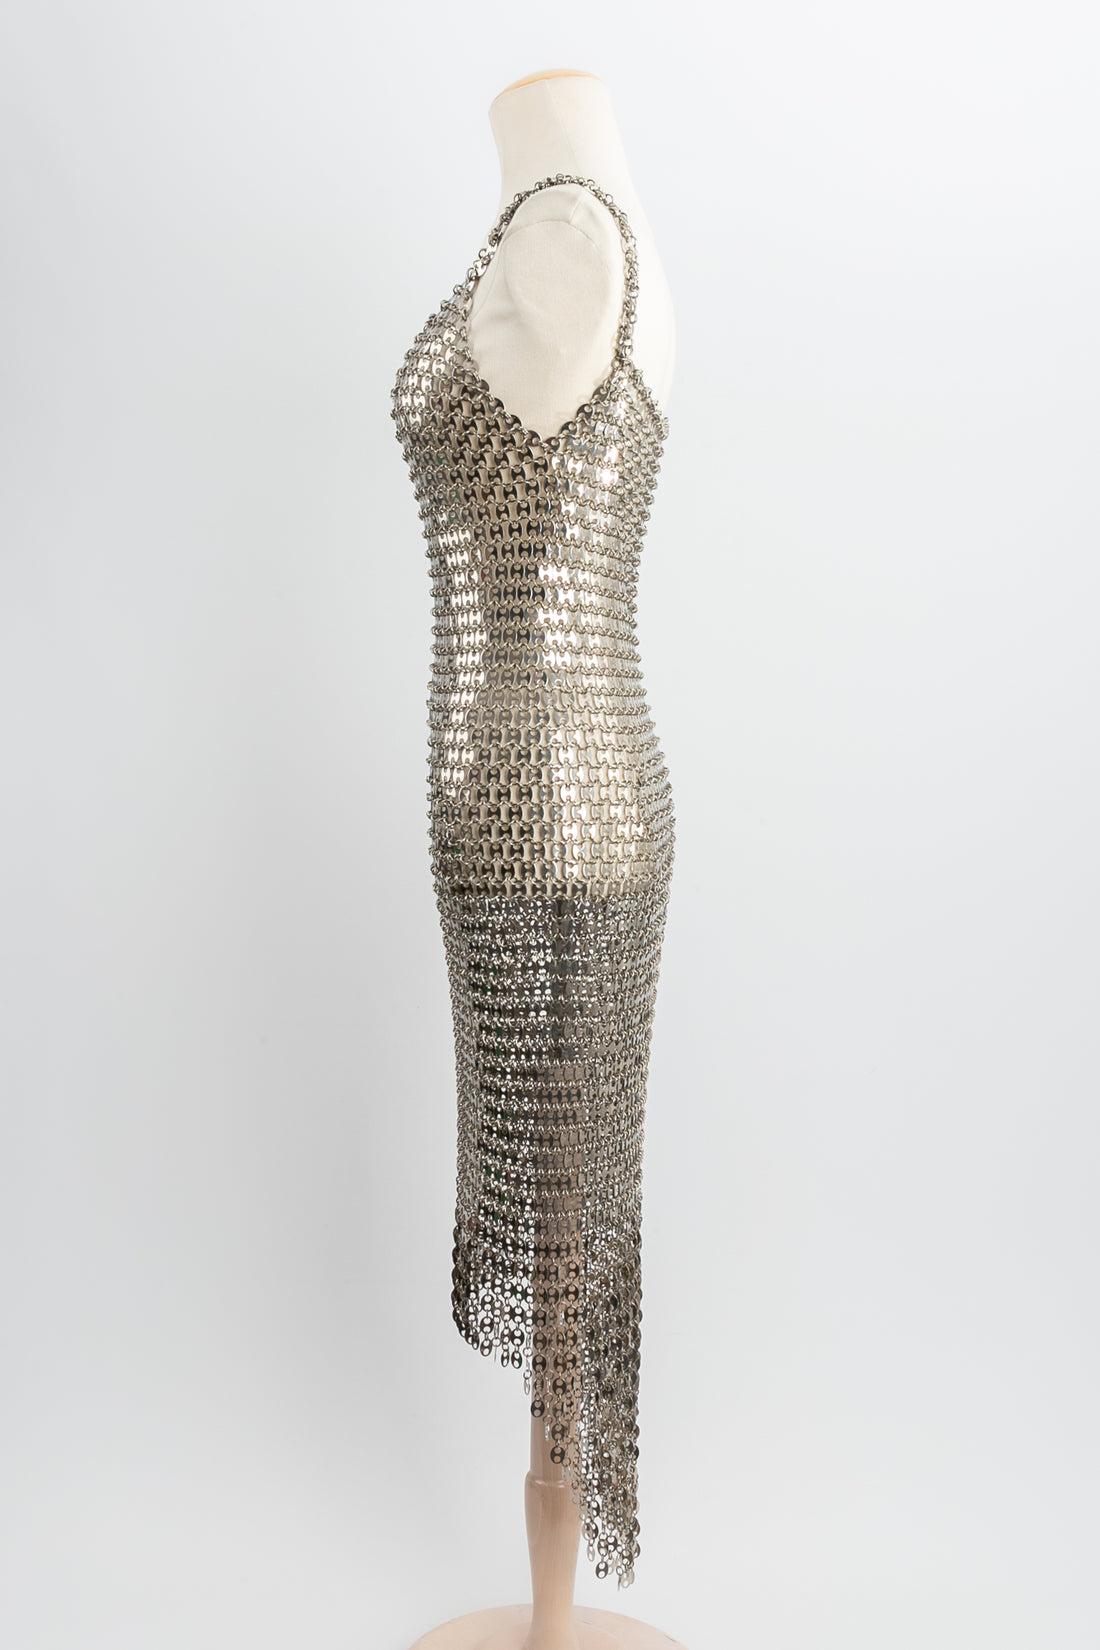 Paco Rabanne - Pencil dress comprised of oval silvery metal chips. 
No signature. 
1982 Spring/Summer Collection. 
No indicated size, it fits a size 36FR.

Additional information: 

Dimensions: 
Bust: 42 cm (16.53